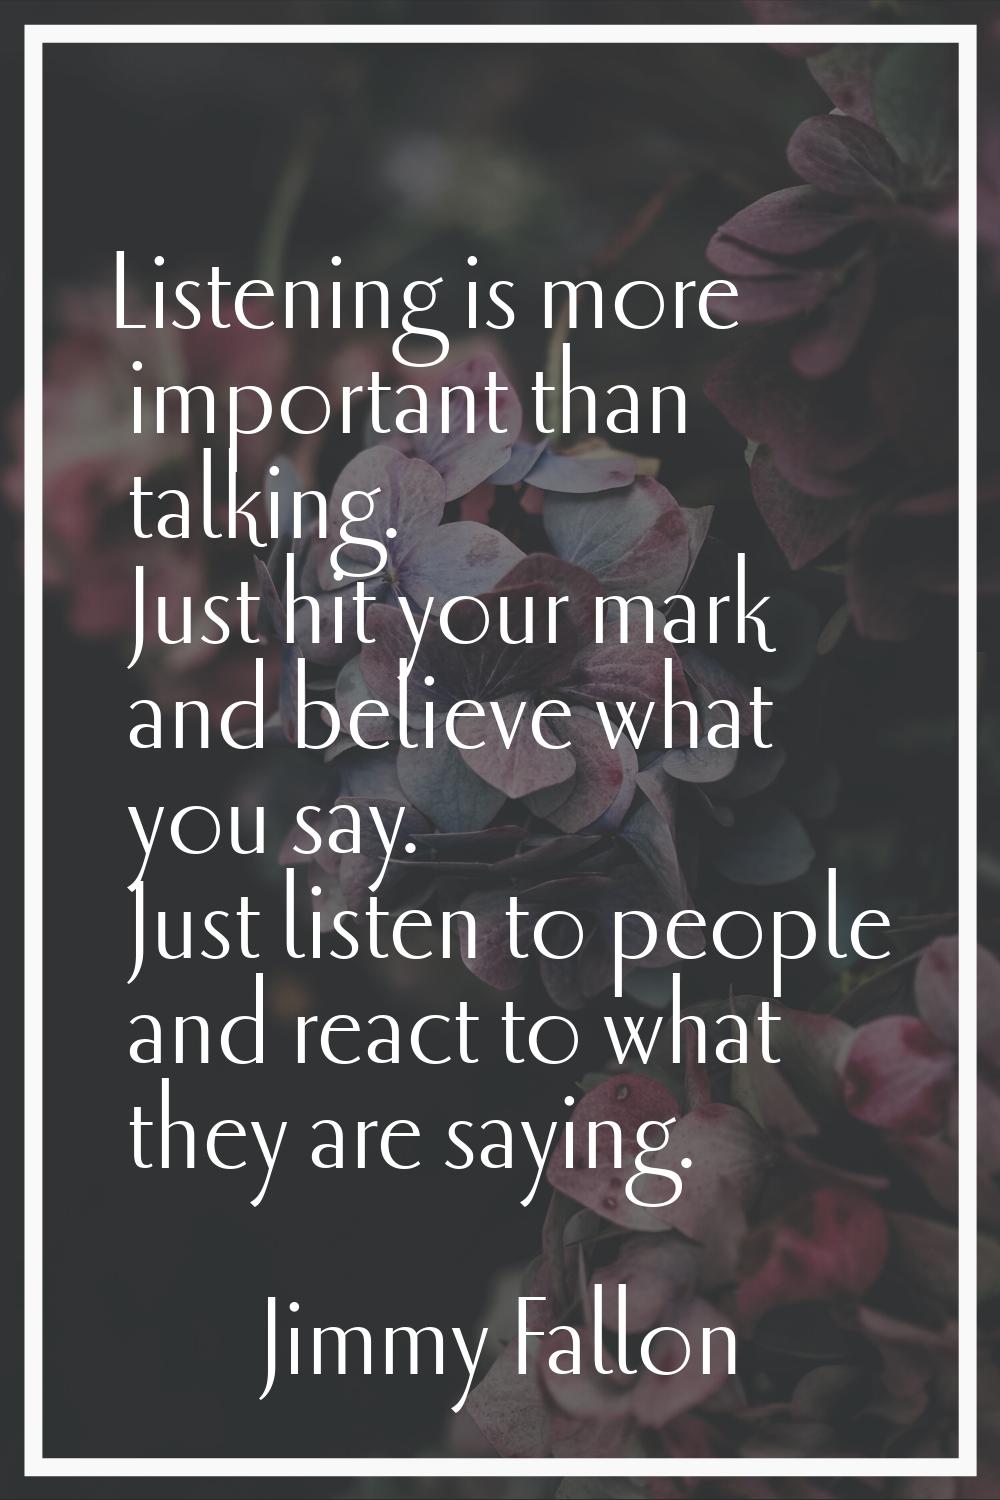 Listening is more important than talking. Just hit your mark and believe what you say. Just listen 